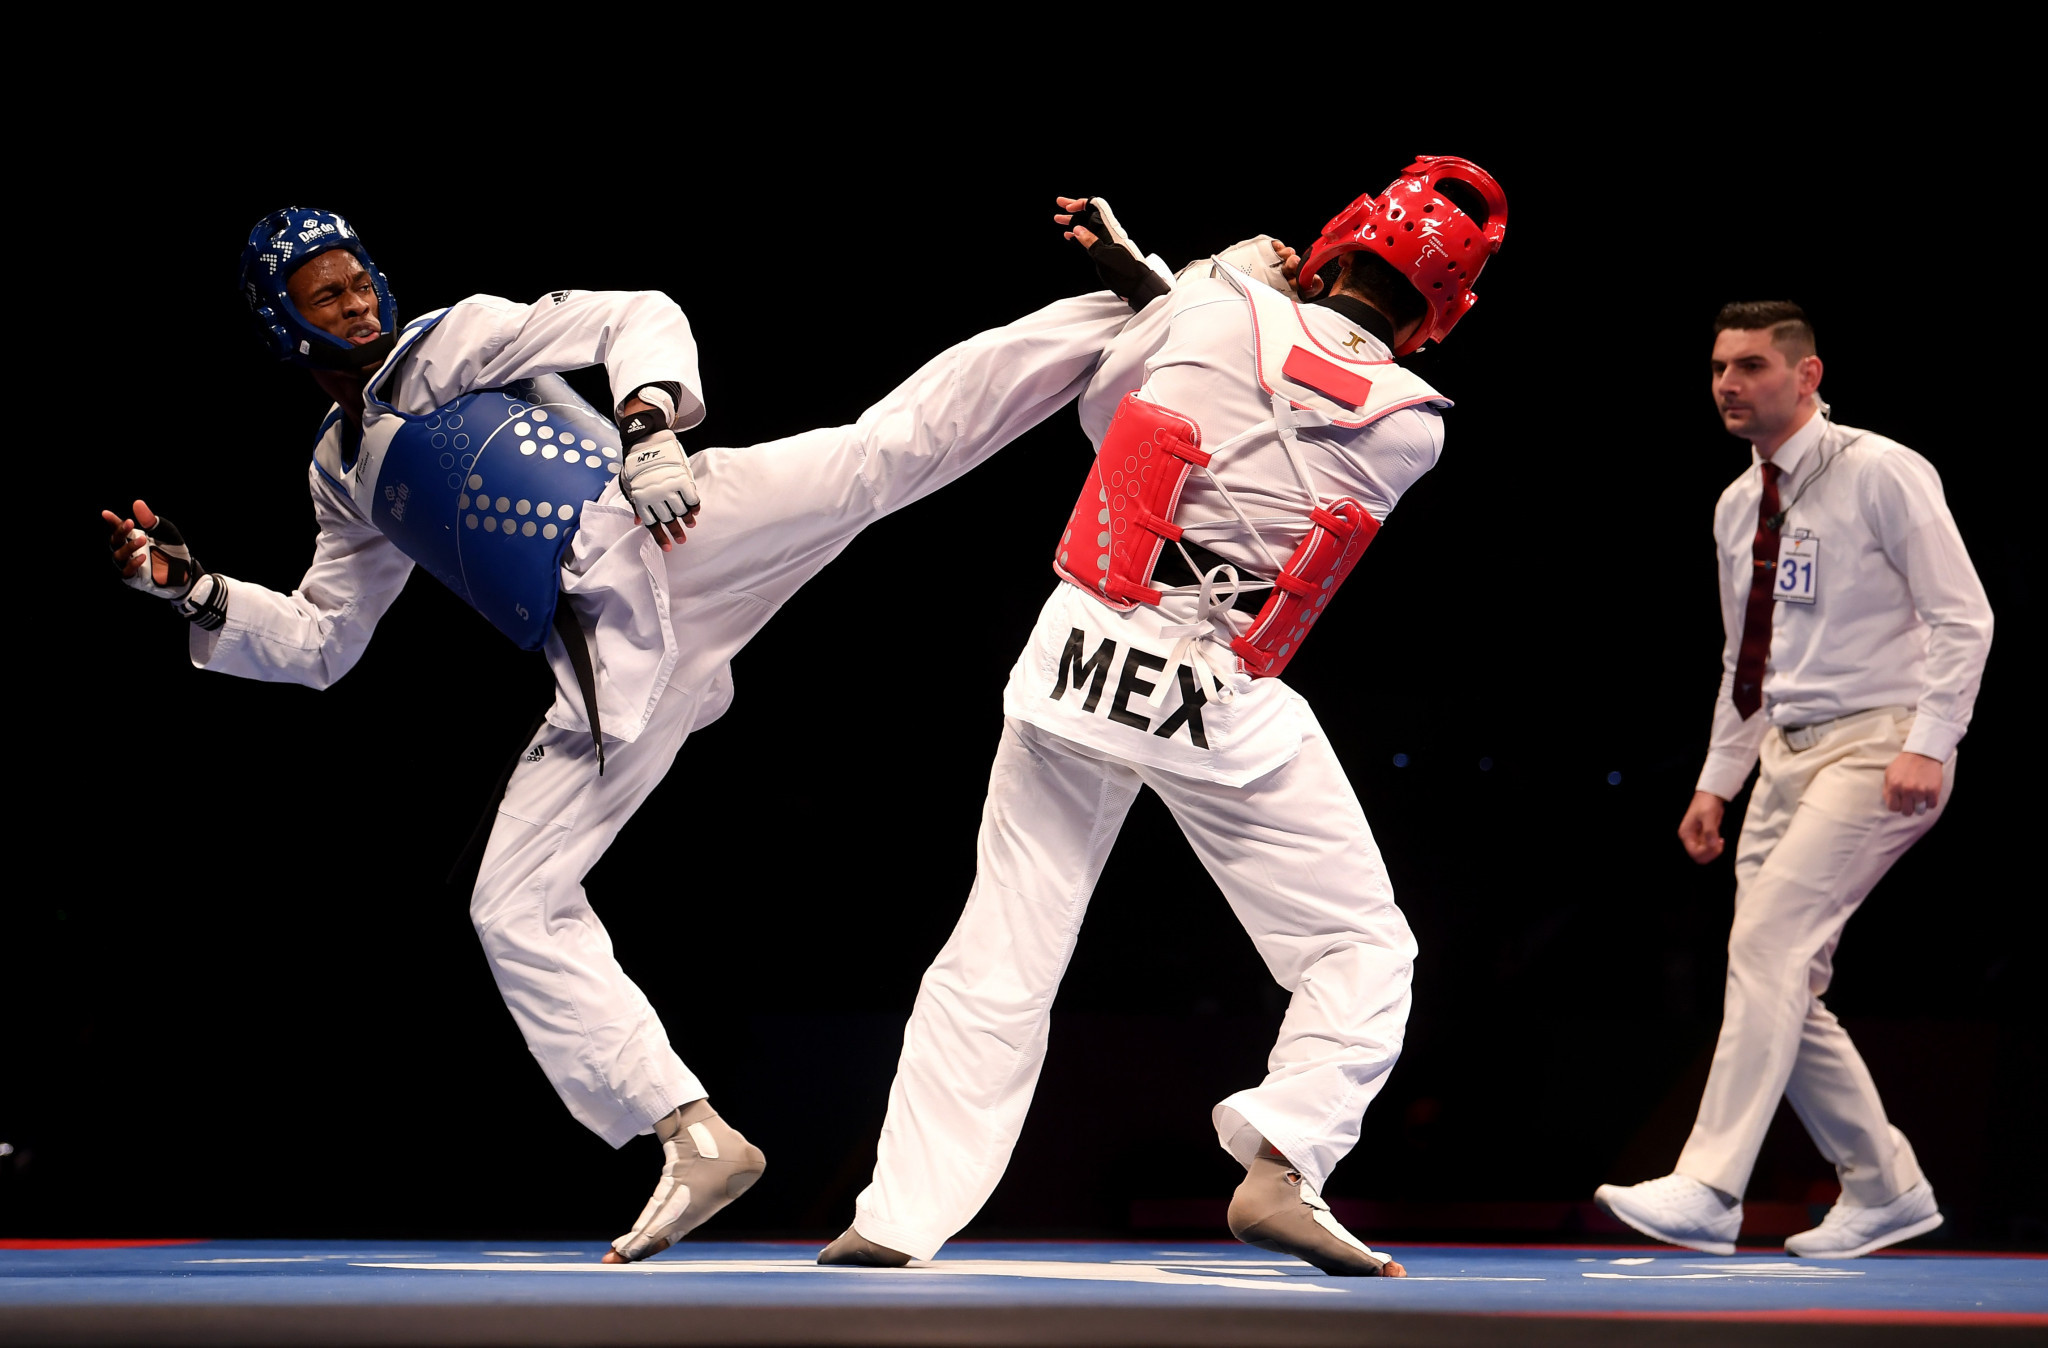 Taekwondo Day celebrated 20 years on from sport's Olympic debut